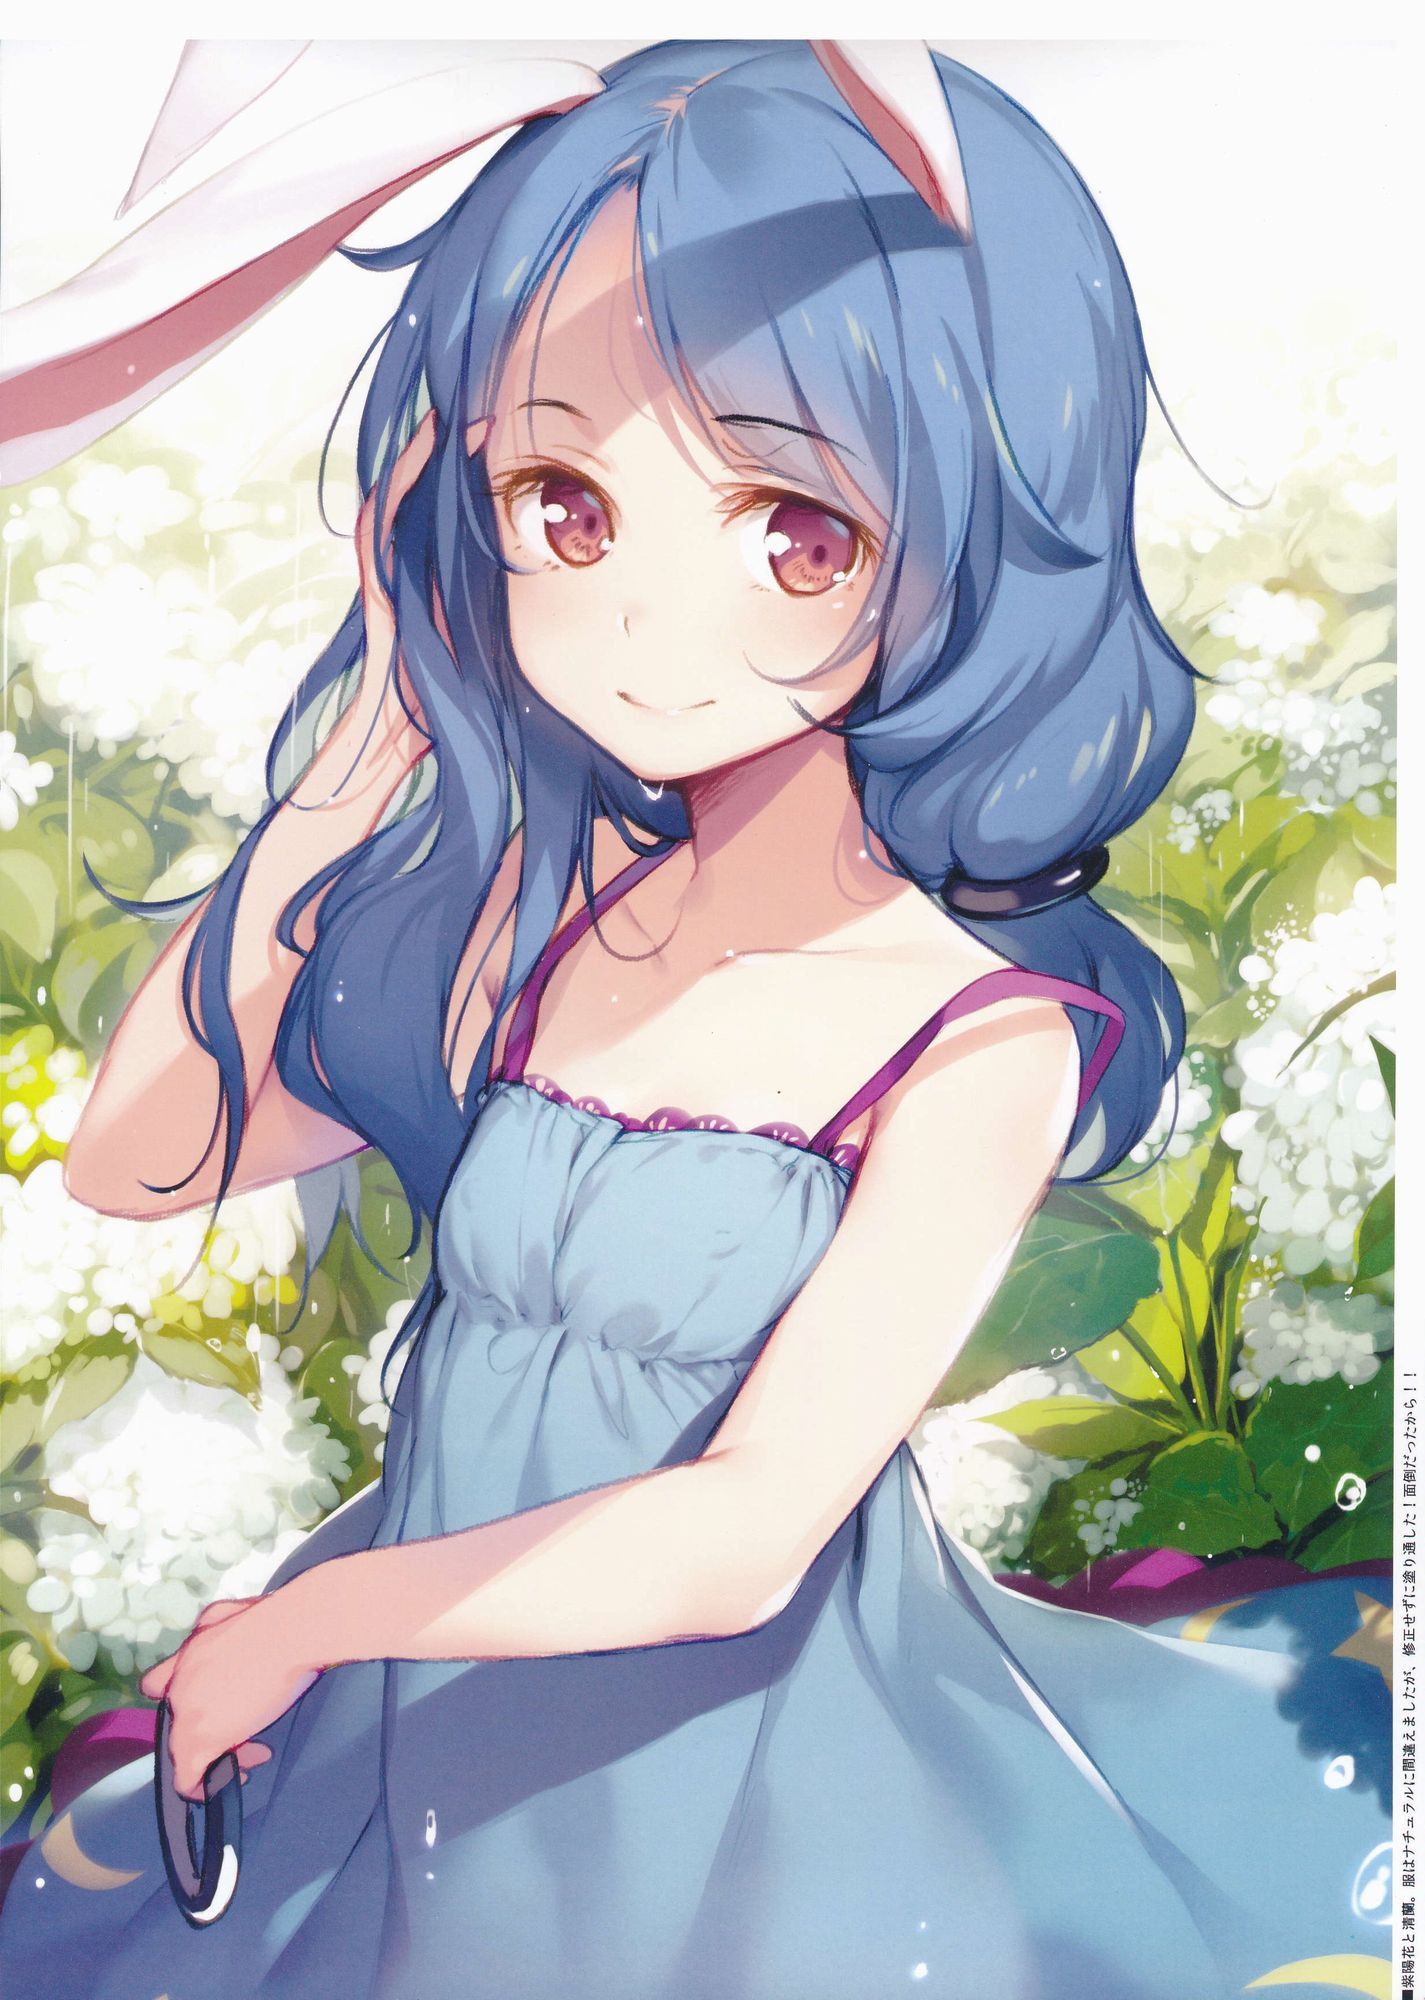 [2nd] Secondary erotic image of a girl with blue or light blue hair Part 7 [Blue hair] 4